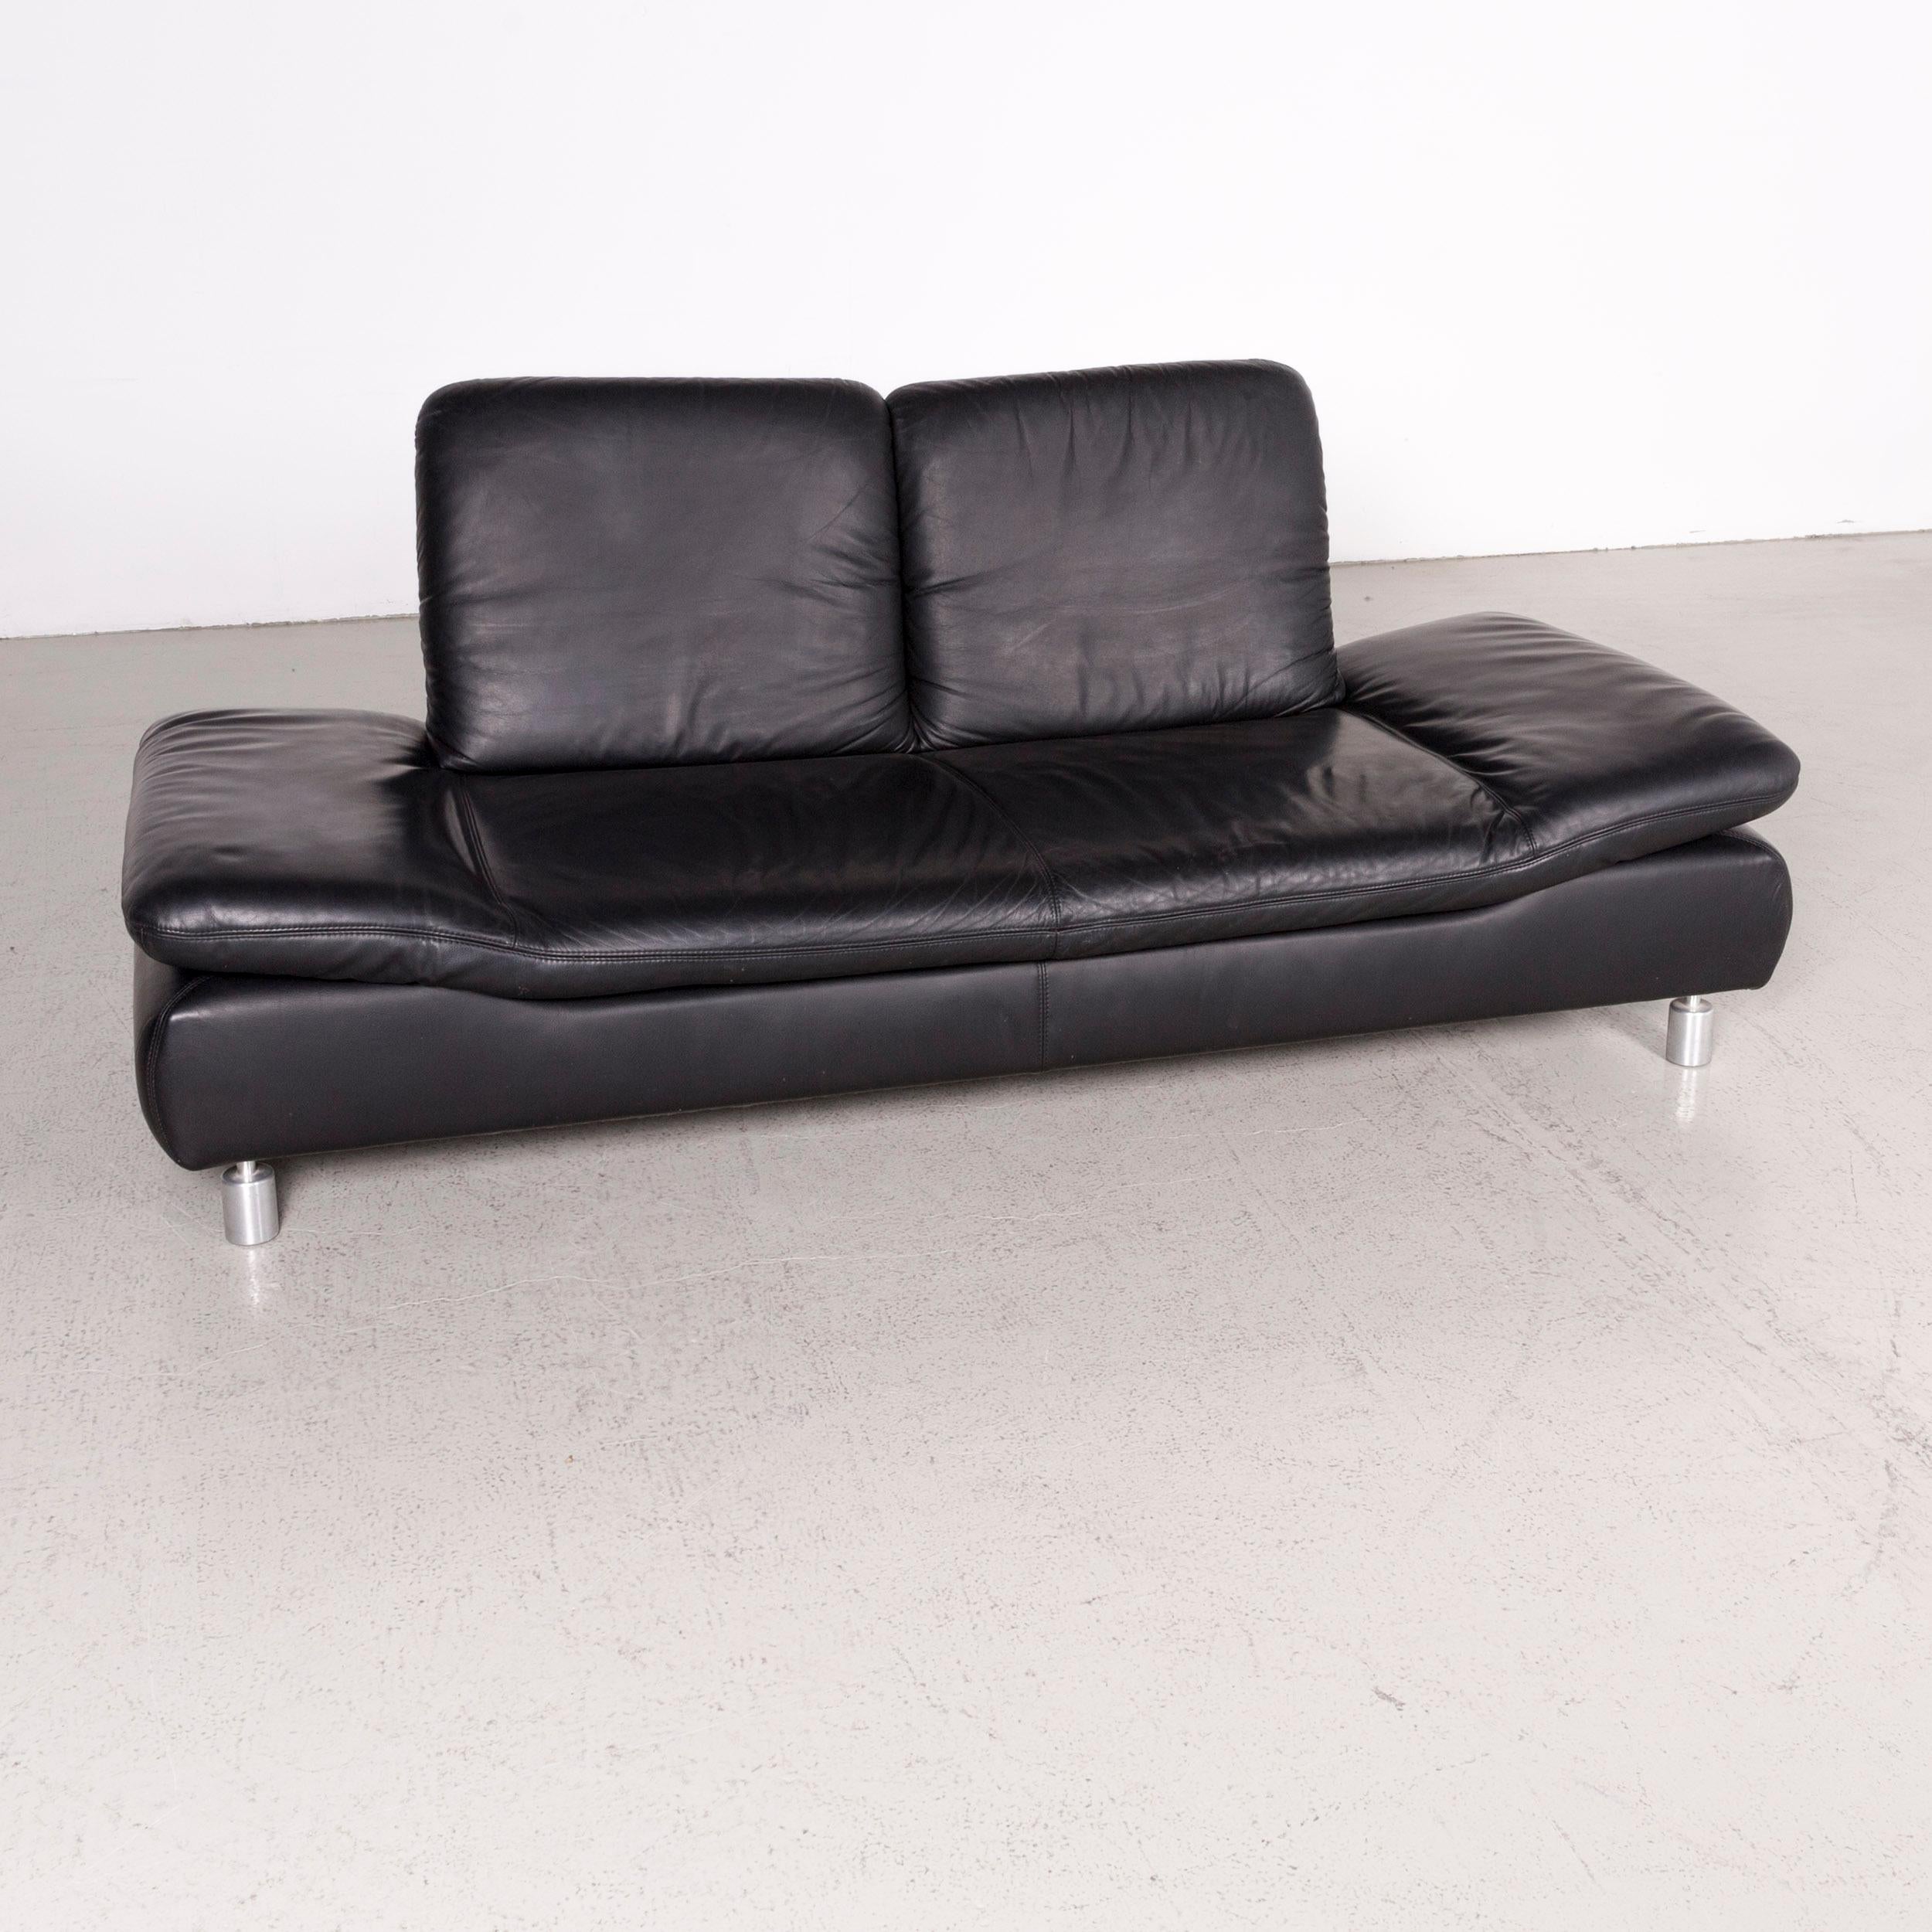 We bring to you a Koinor Rivoli designer leather sofa black genuine leather three-seat couch.

Product measurements in centimeters:

Depth 80
Width 210
Height 85
Seat-height 40
Rest-height 45
Seat-depth 55
Seat-width 120
Back-height